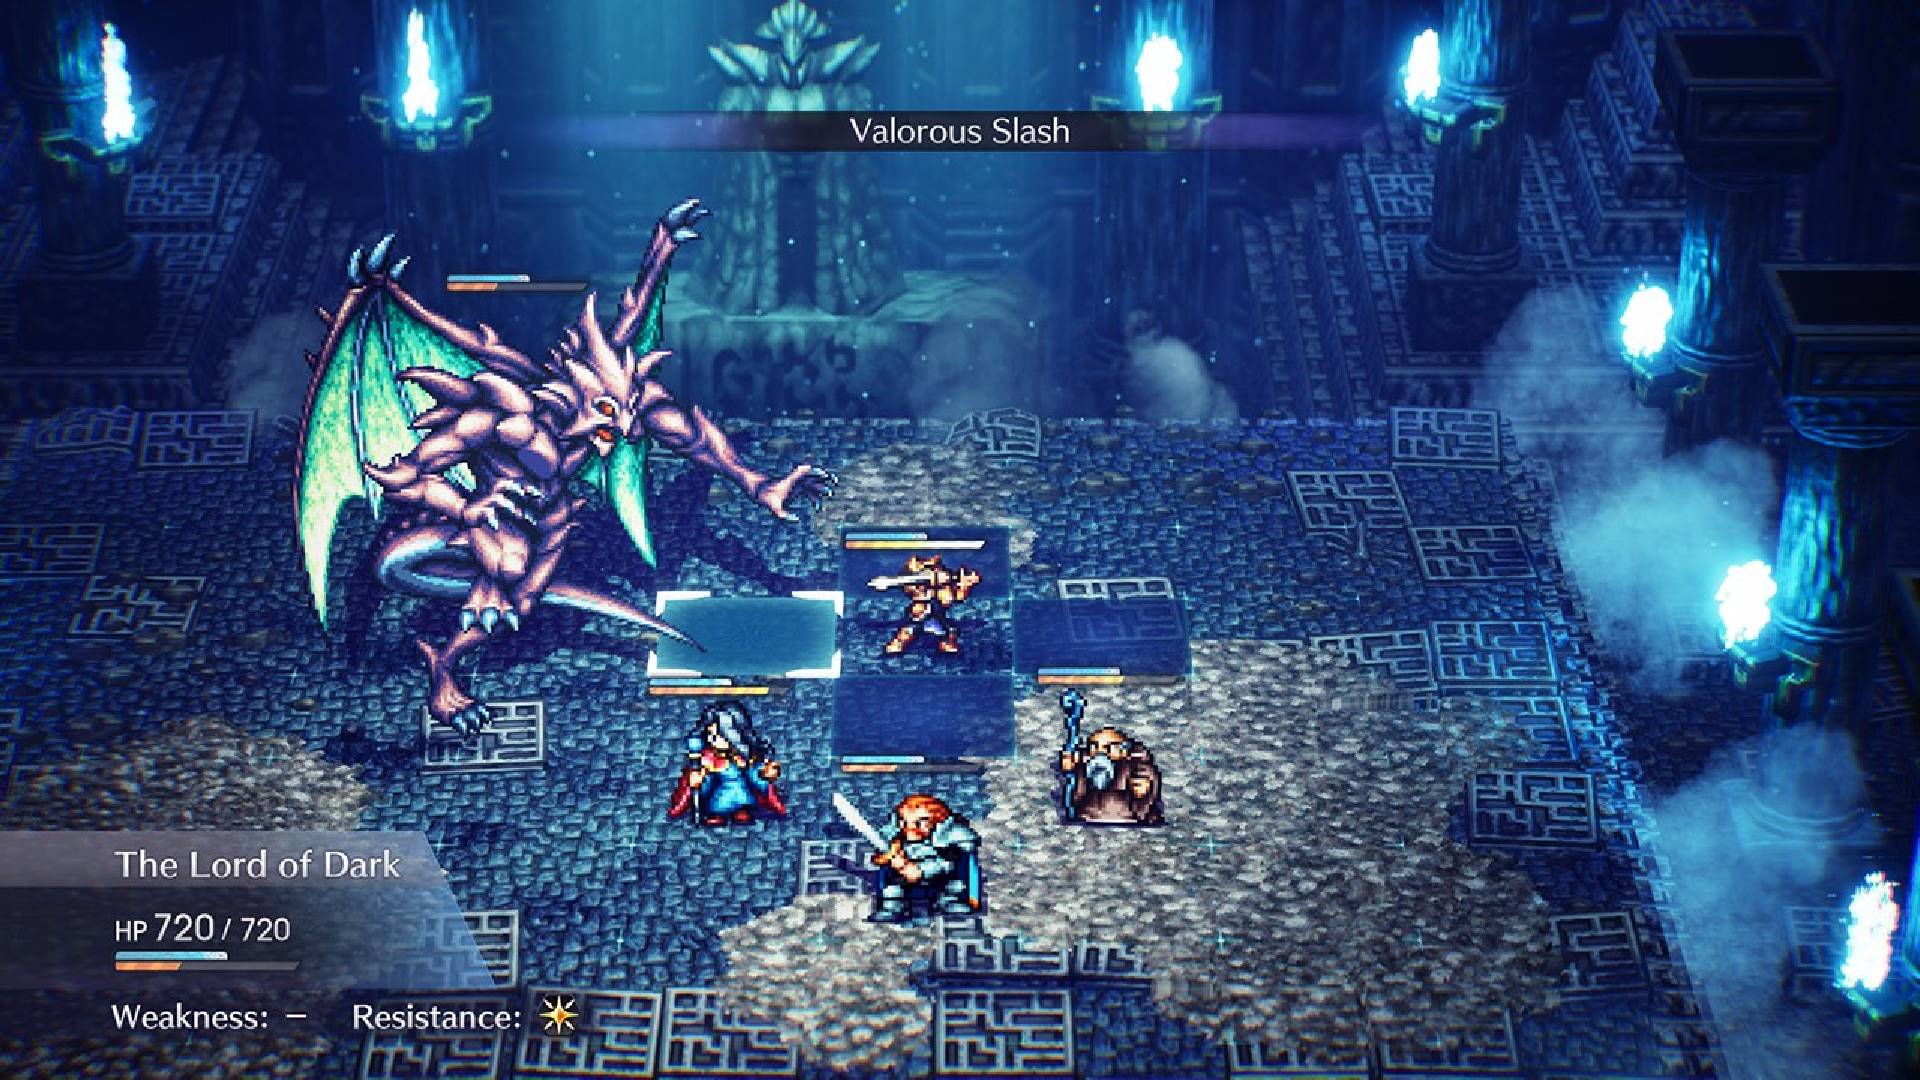 Best Switch games: a pixelated screenshot from the RPG Live A Live shows a dungeon, with four players attacking a purple demon with horns 